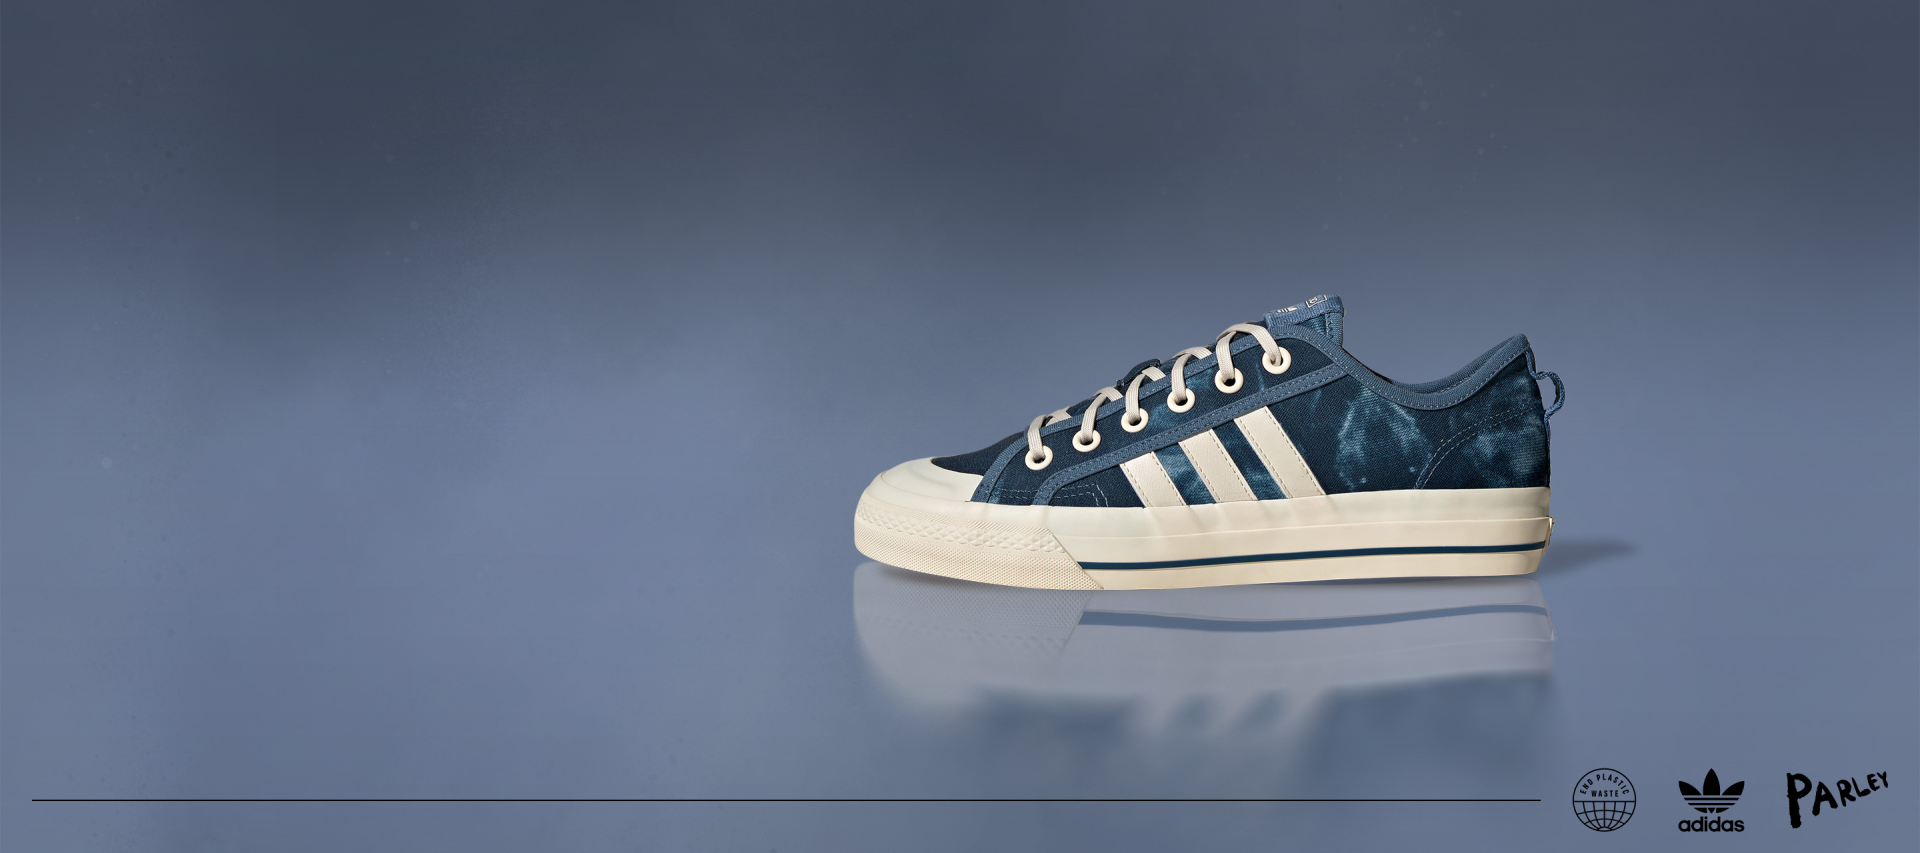 The dark blue, sun bleached Nizza sneaker is displayed from the side on a blue background, showing the white adidas 3-stripes.